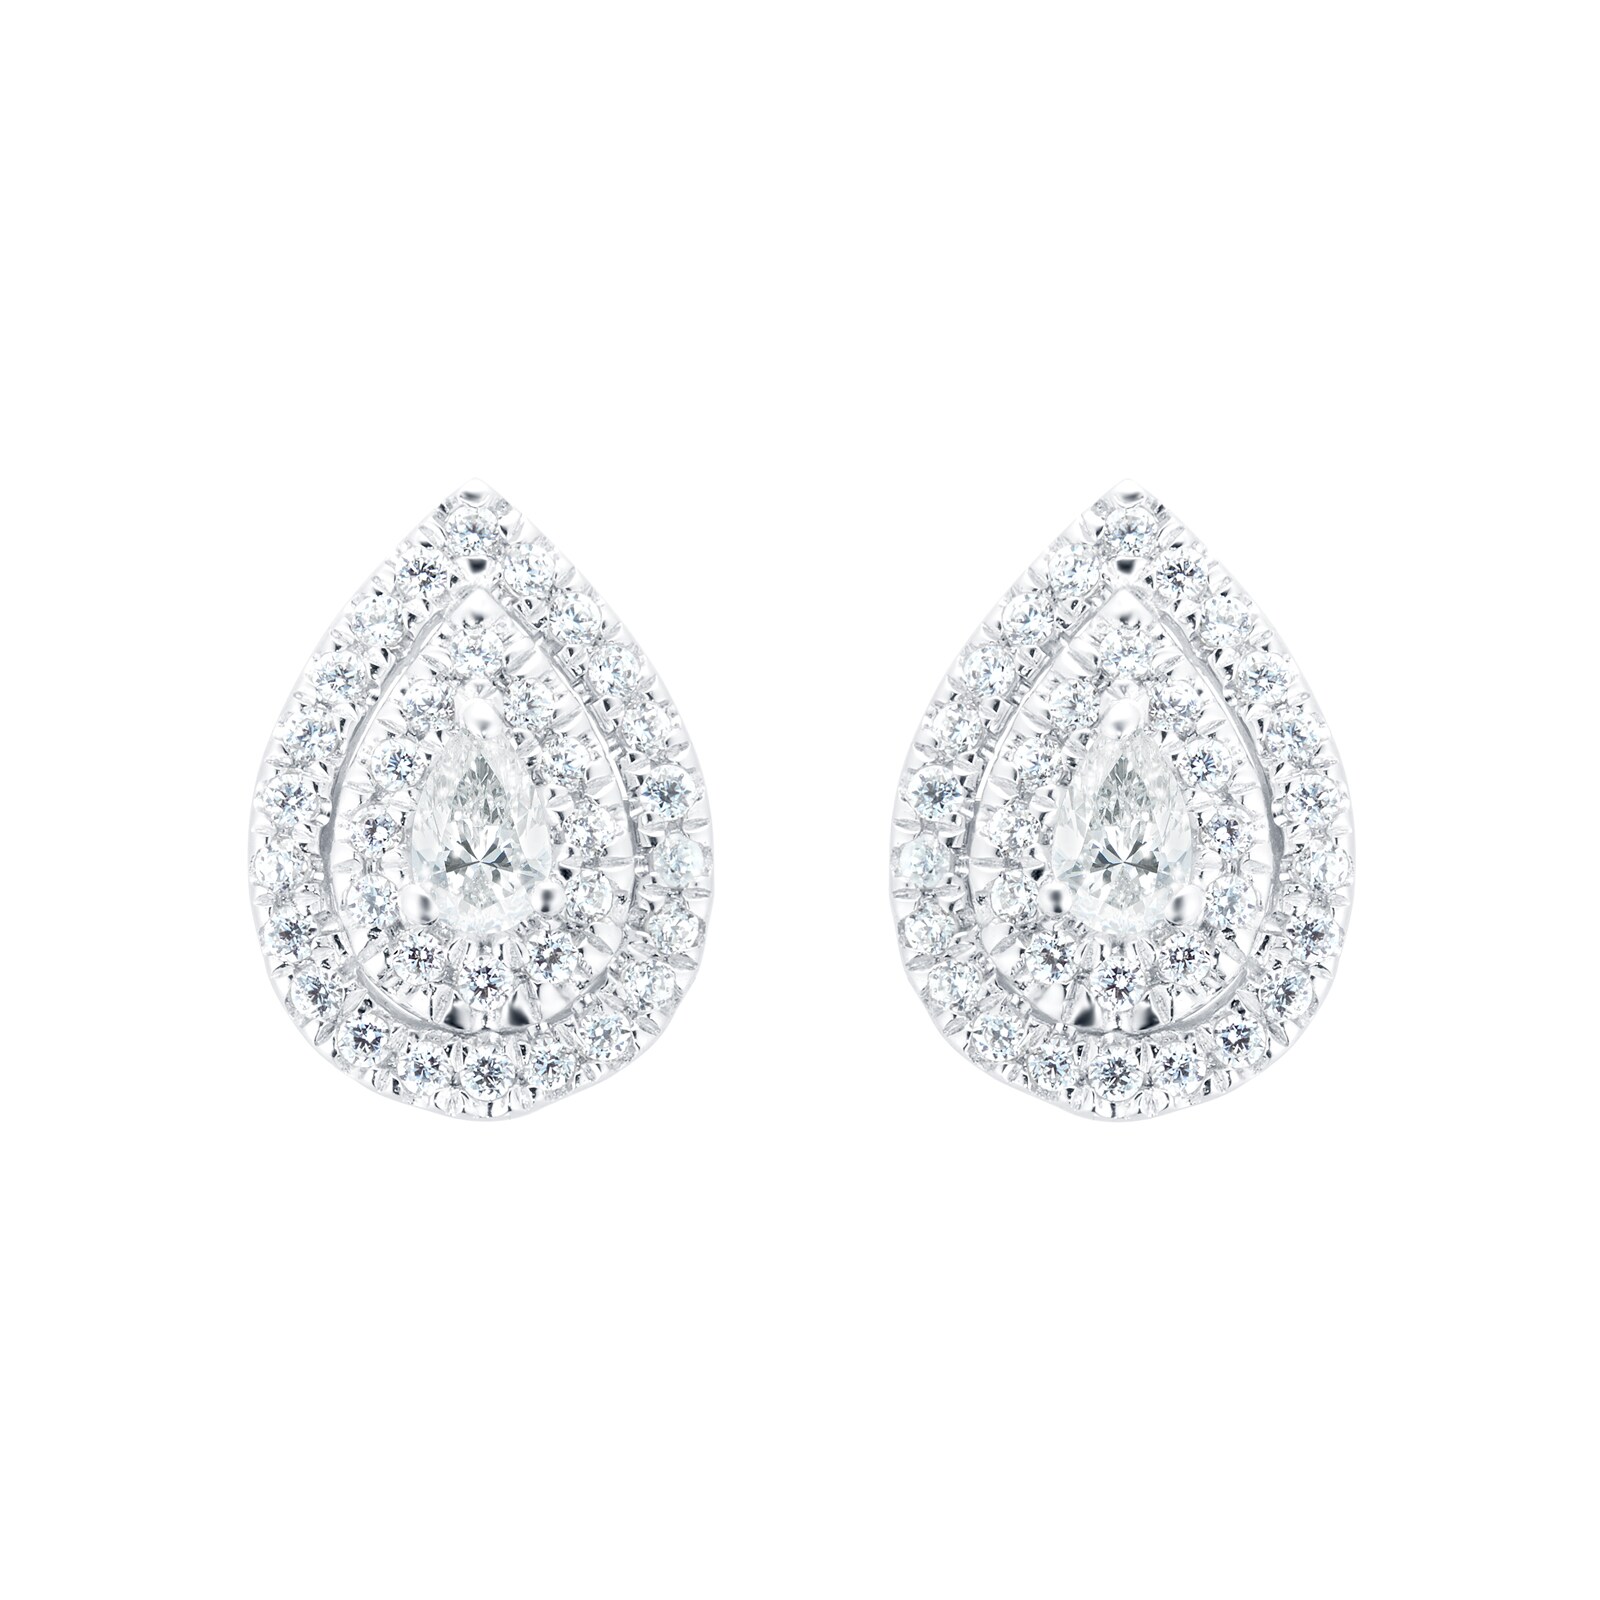 9ct White Gold 0.25cttw Diamond Pear Double Halo Stud Earrings